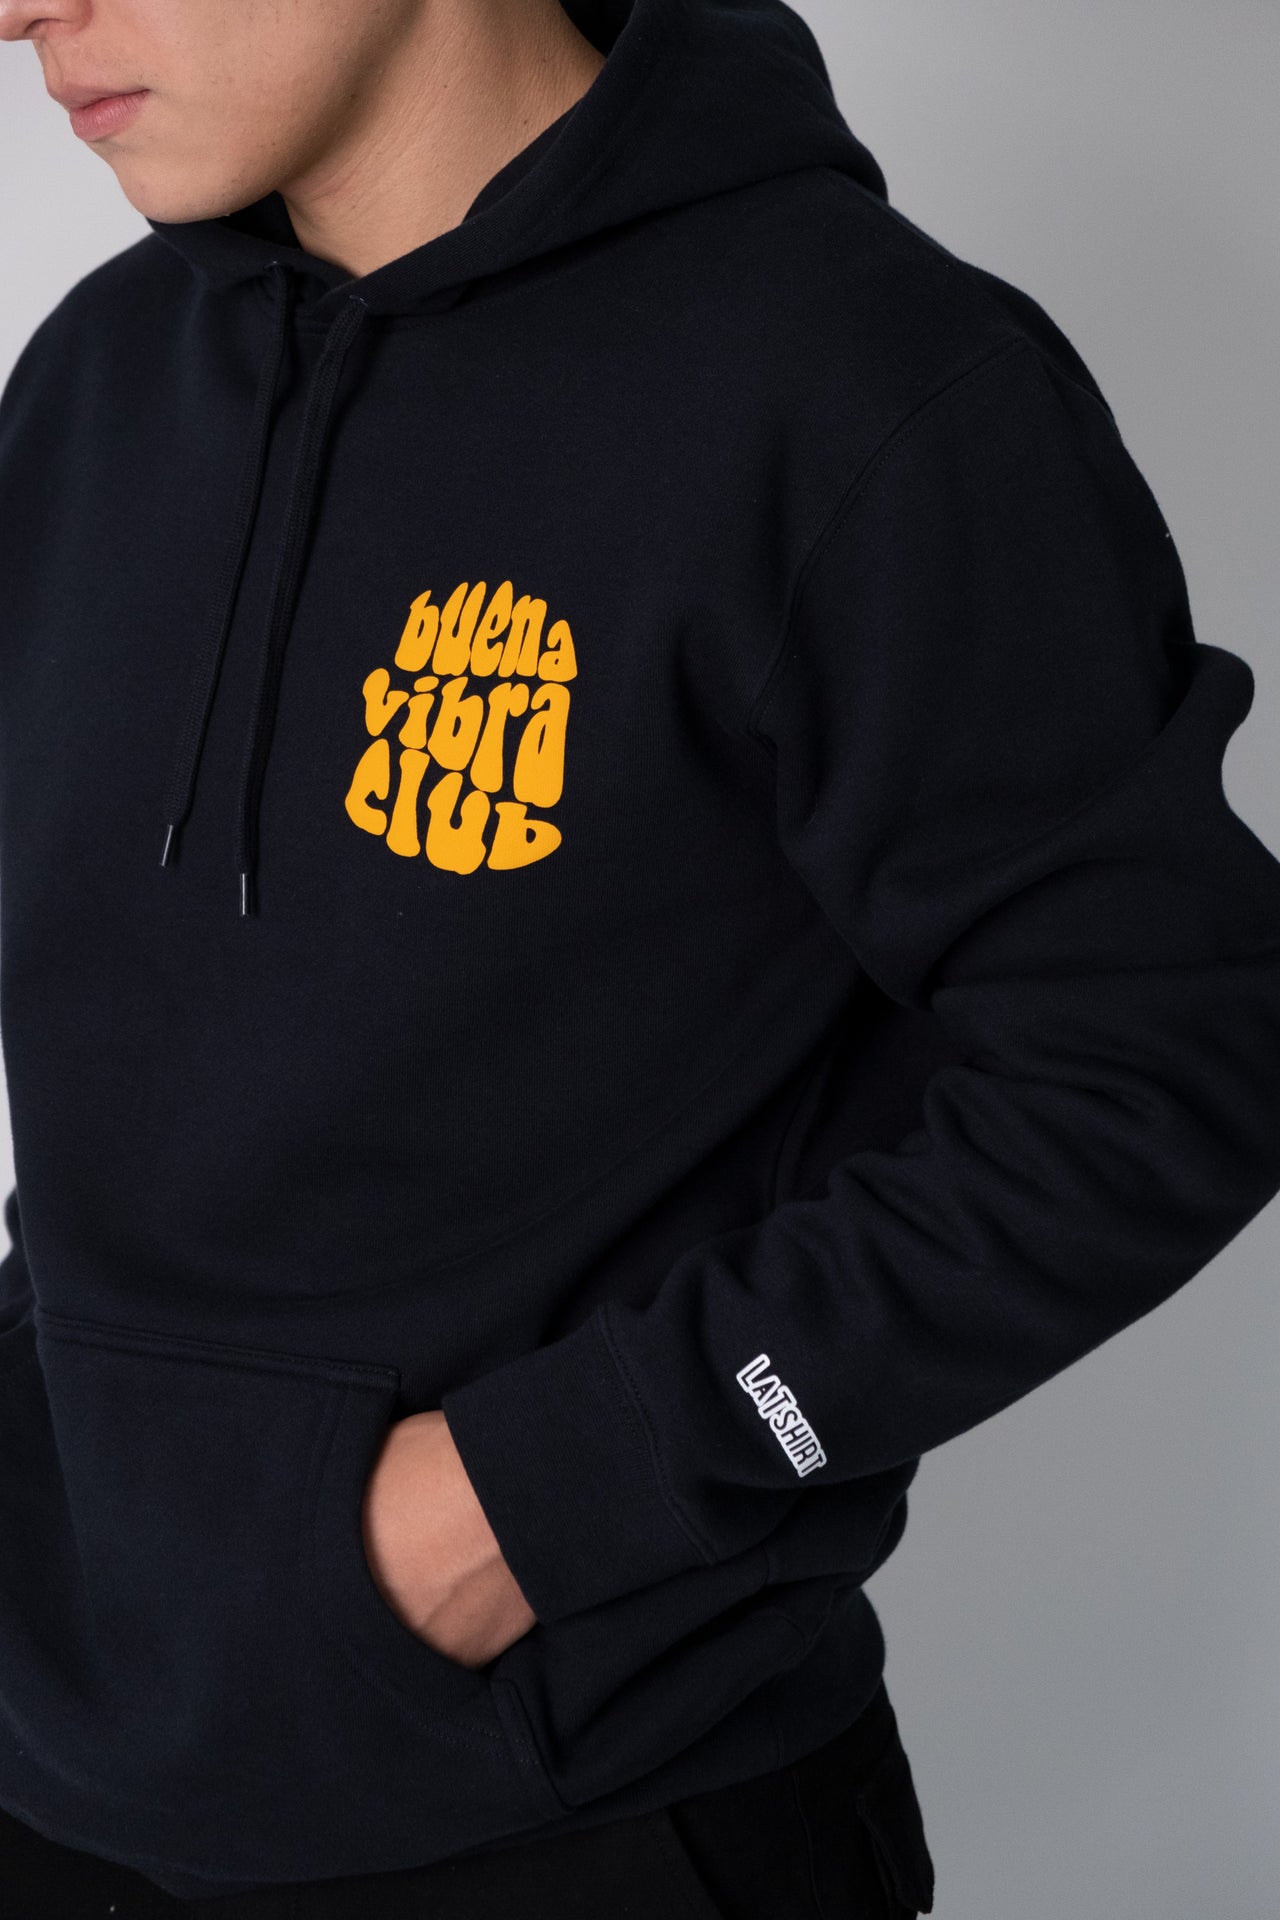 Buena Vibra Hoodie (front only)